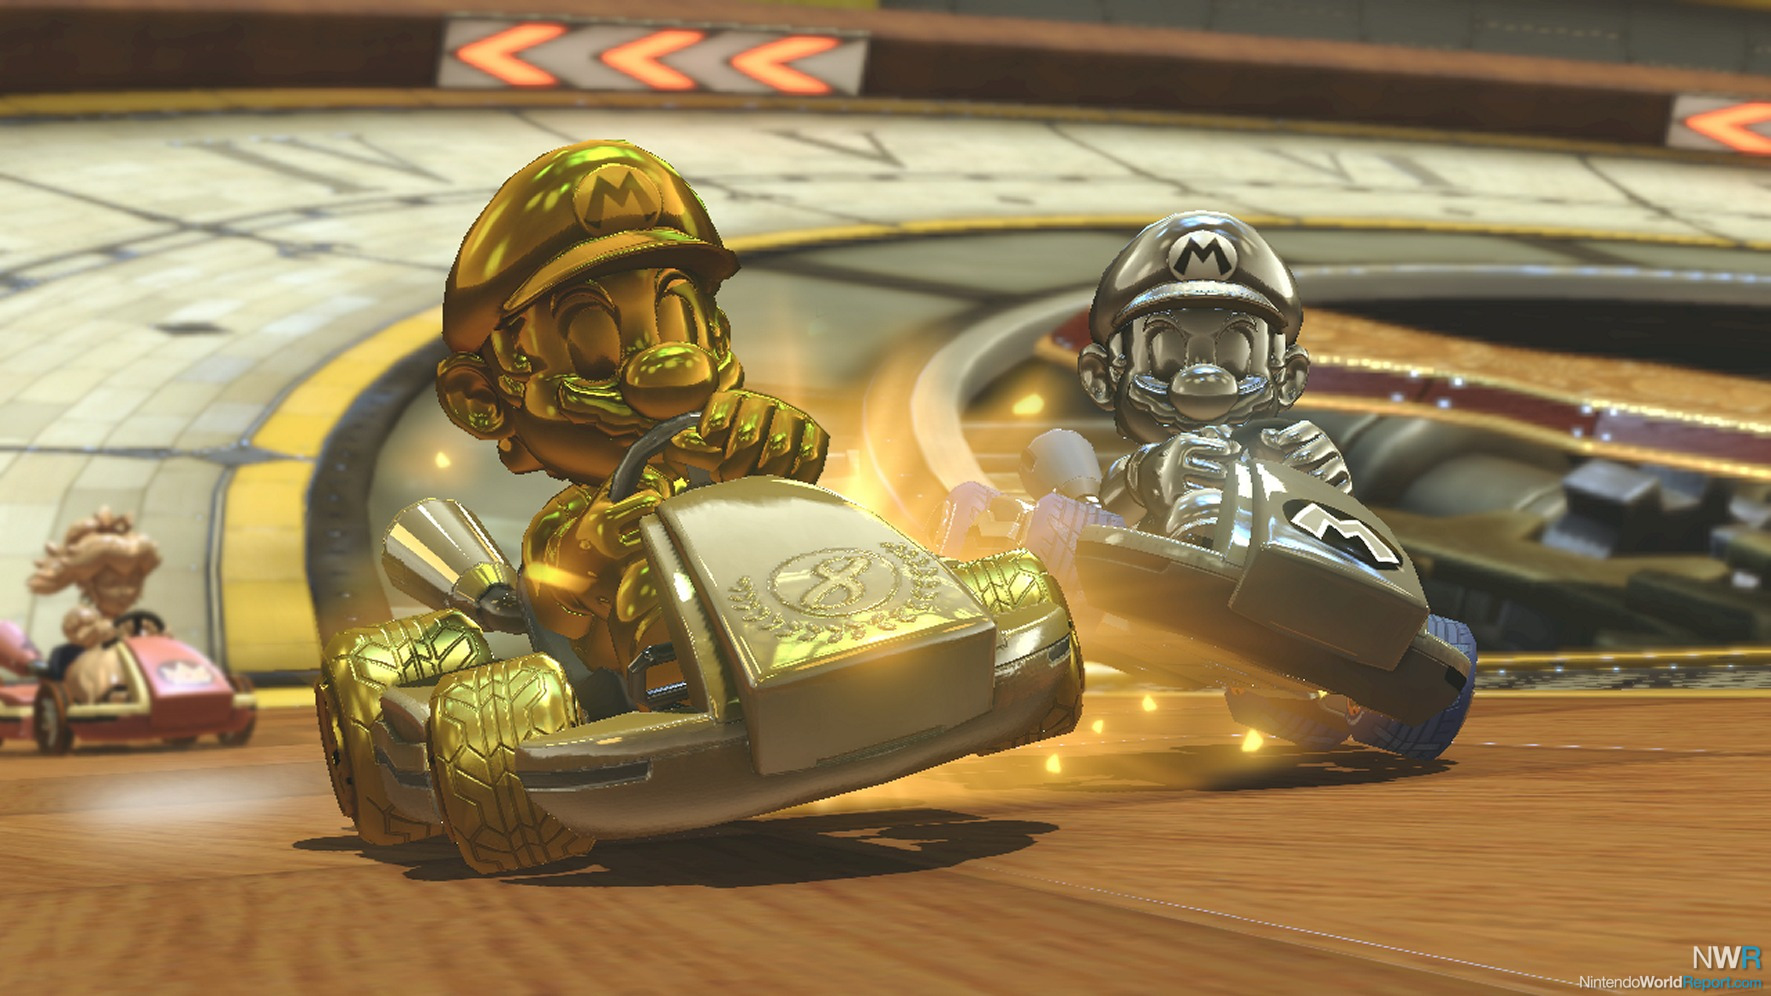 Mario Kart 8 Is Getting A Two-Year DLC Pack With 48 Courses